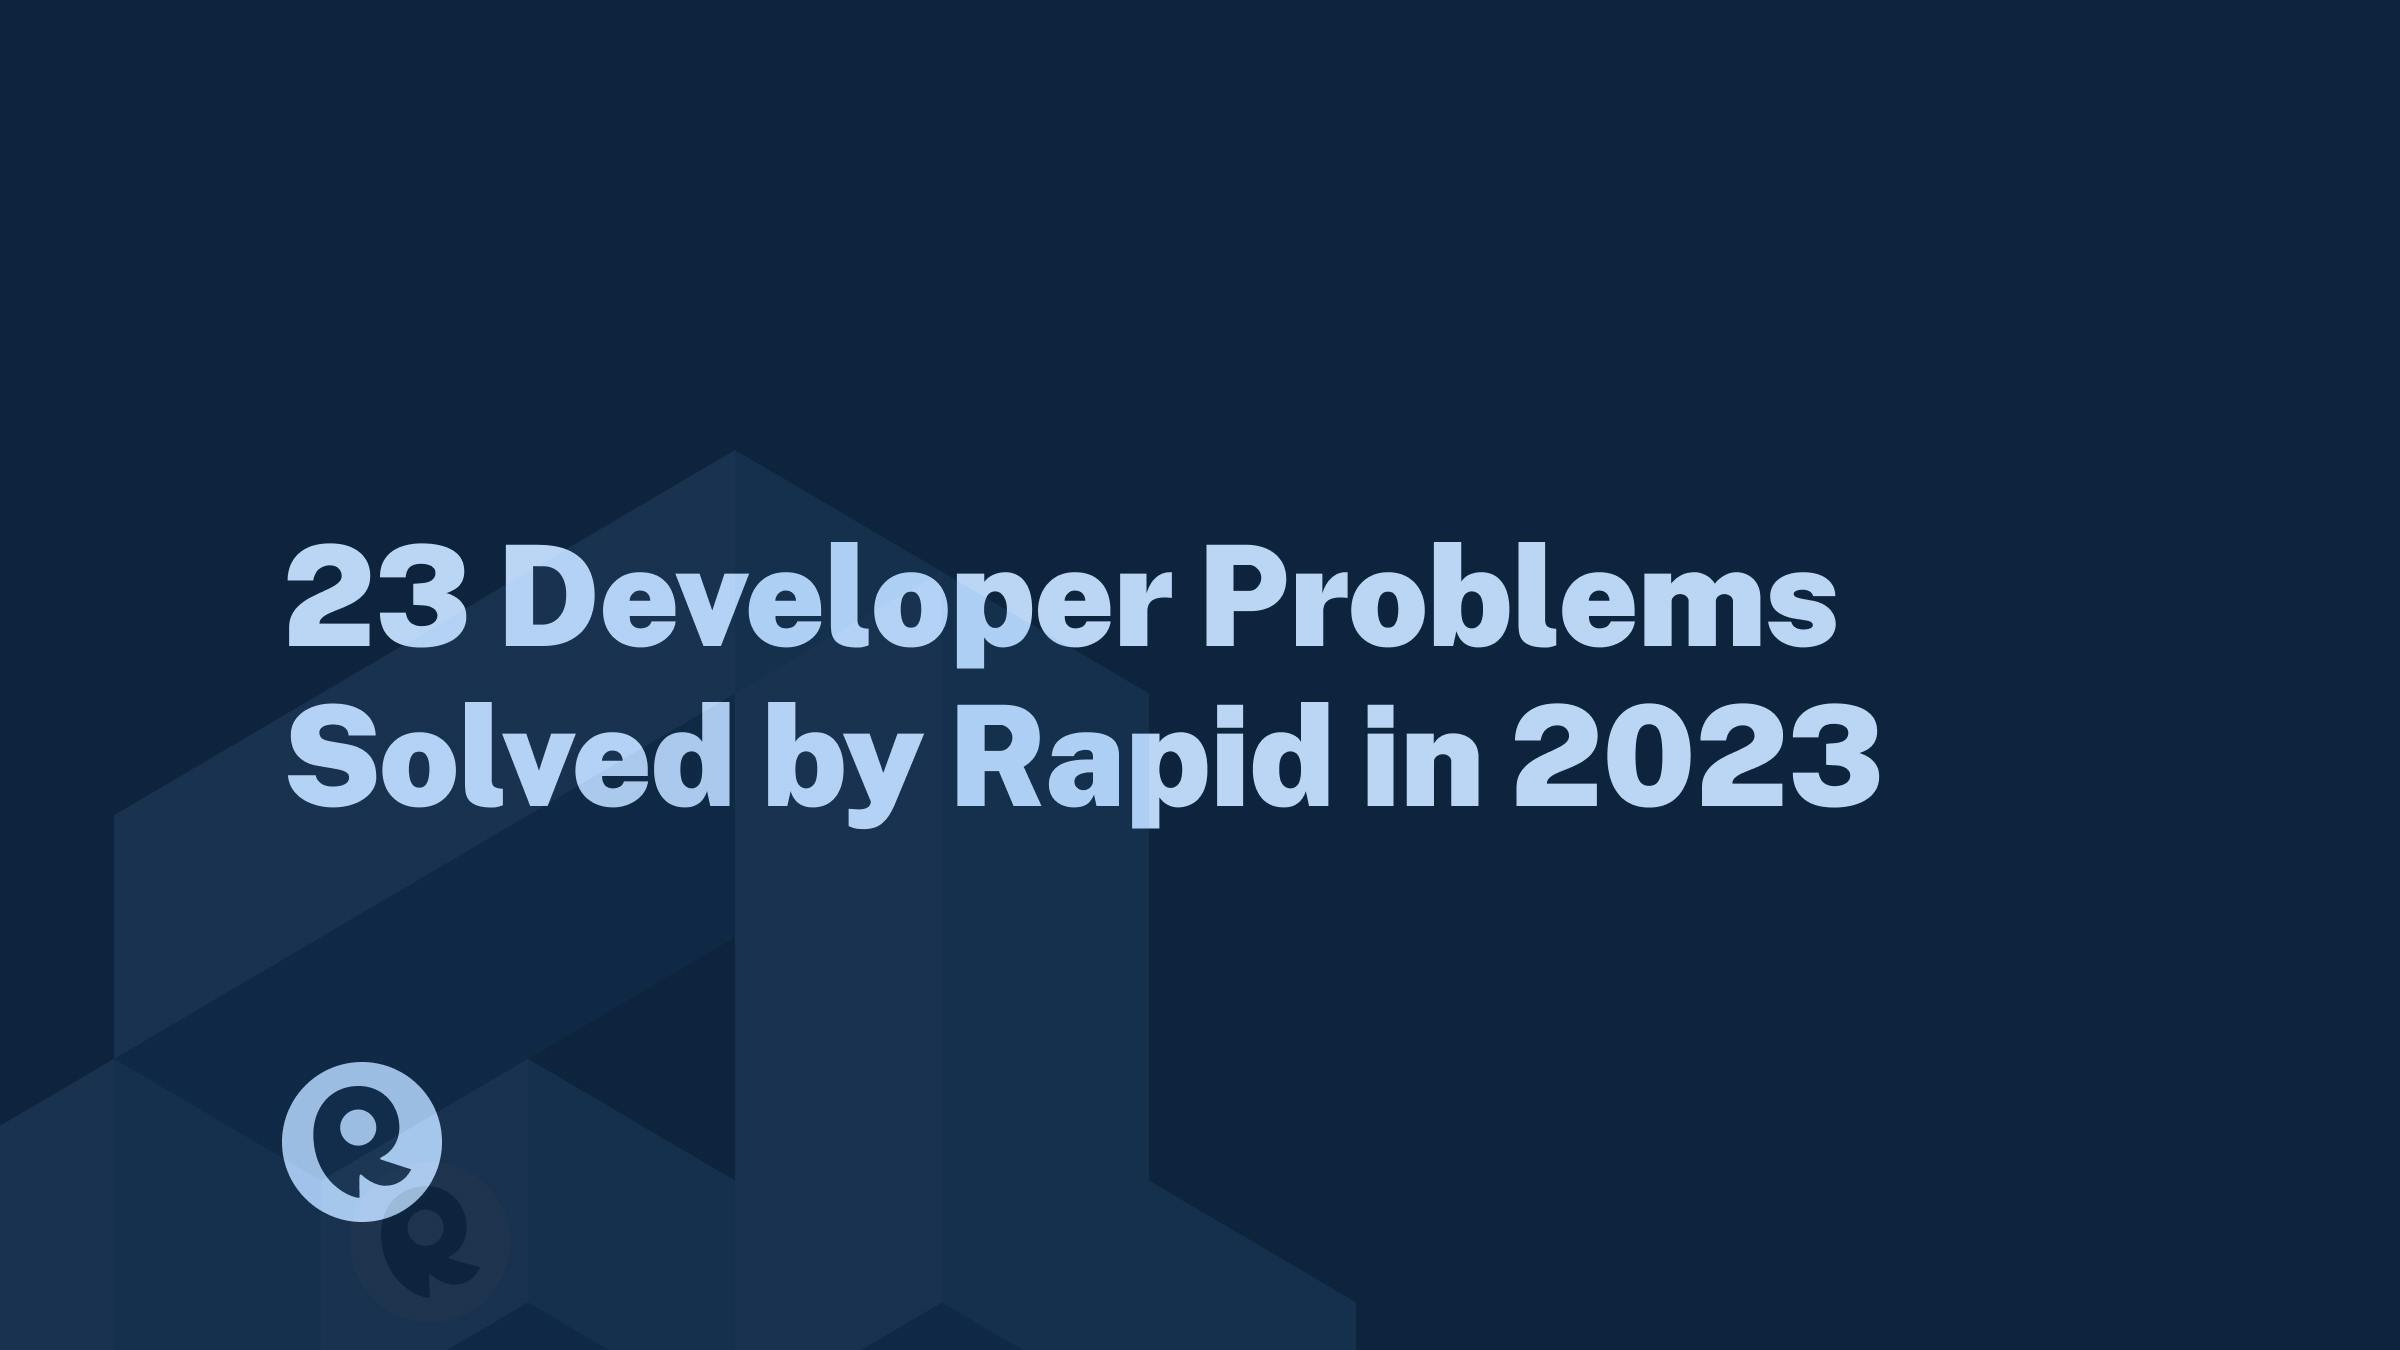 23 Developer Problems Solved by Rapid in 2023